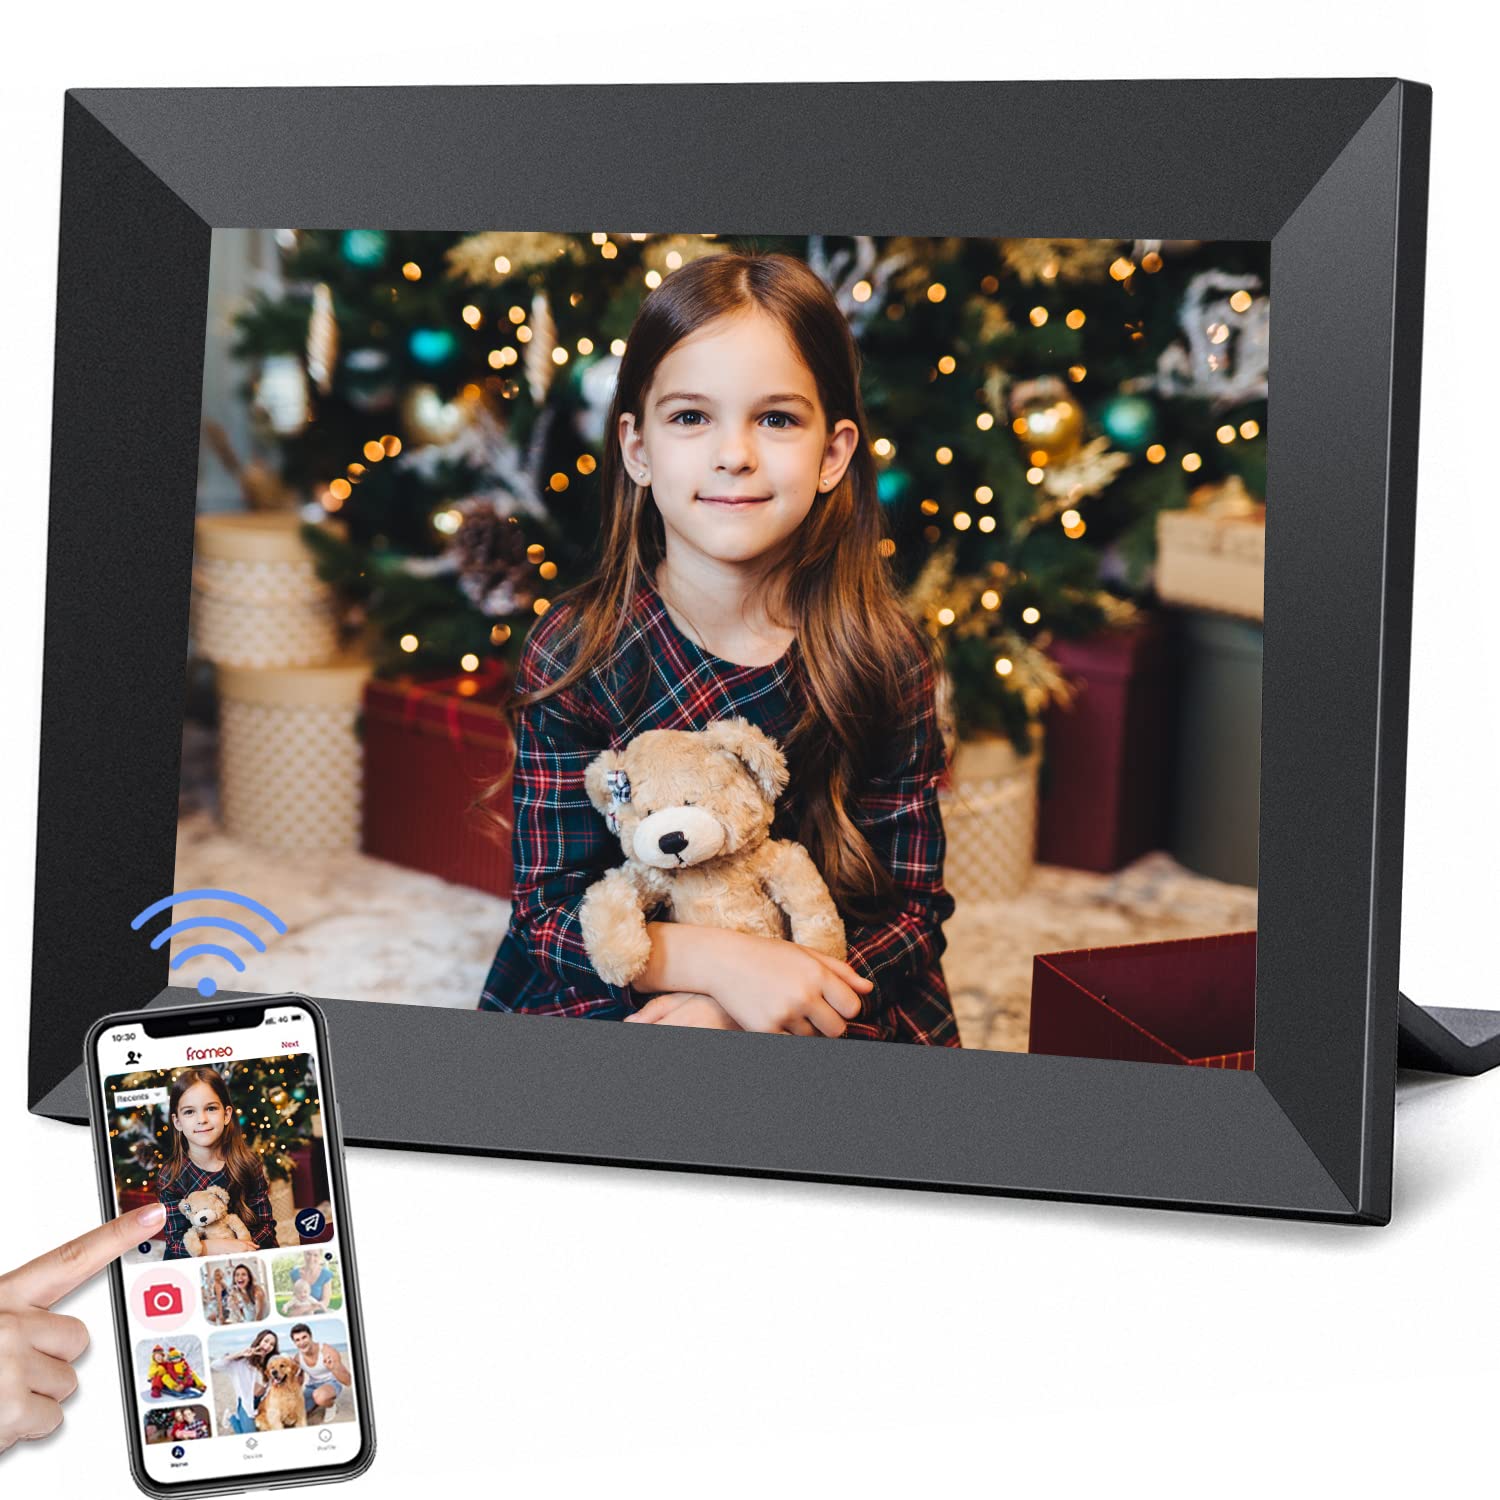 YunQiDeer Frameo 101 Inch WiFi Digital Picture Frame with 1280 * 800P IPS Touch Screen HD Disply,Built-in 16gB Storage,Video clips and Sli